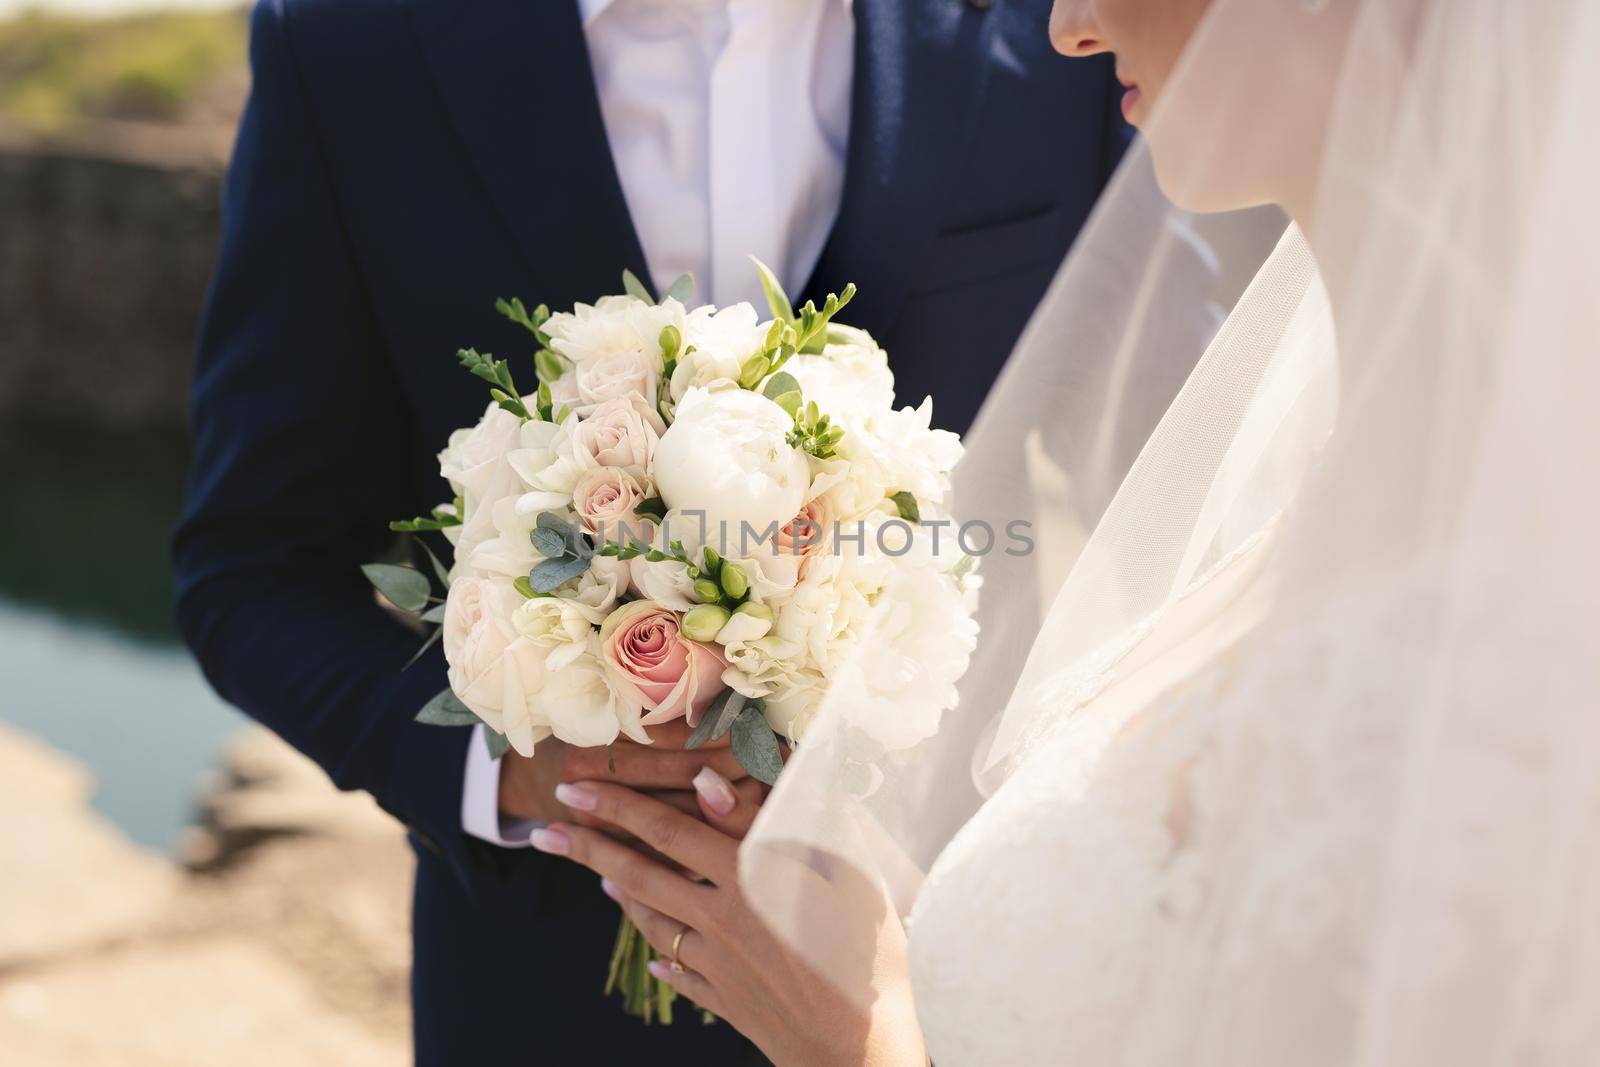 Delicate wedding bouquet of white, pink and powdery flowers in the hands of the bride.